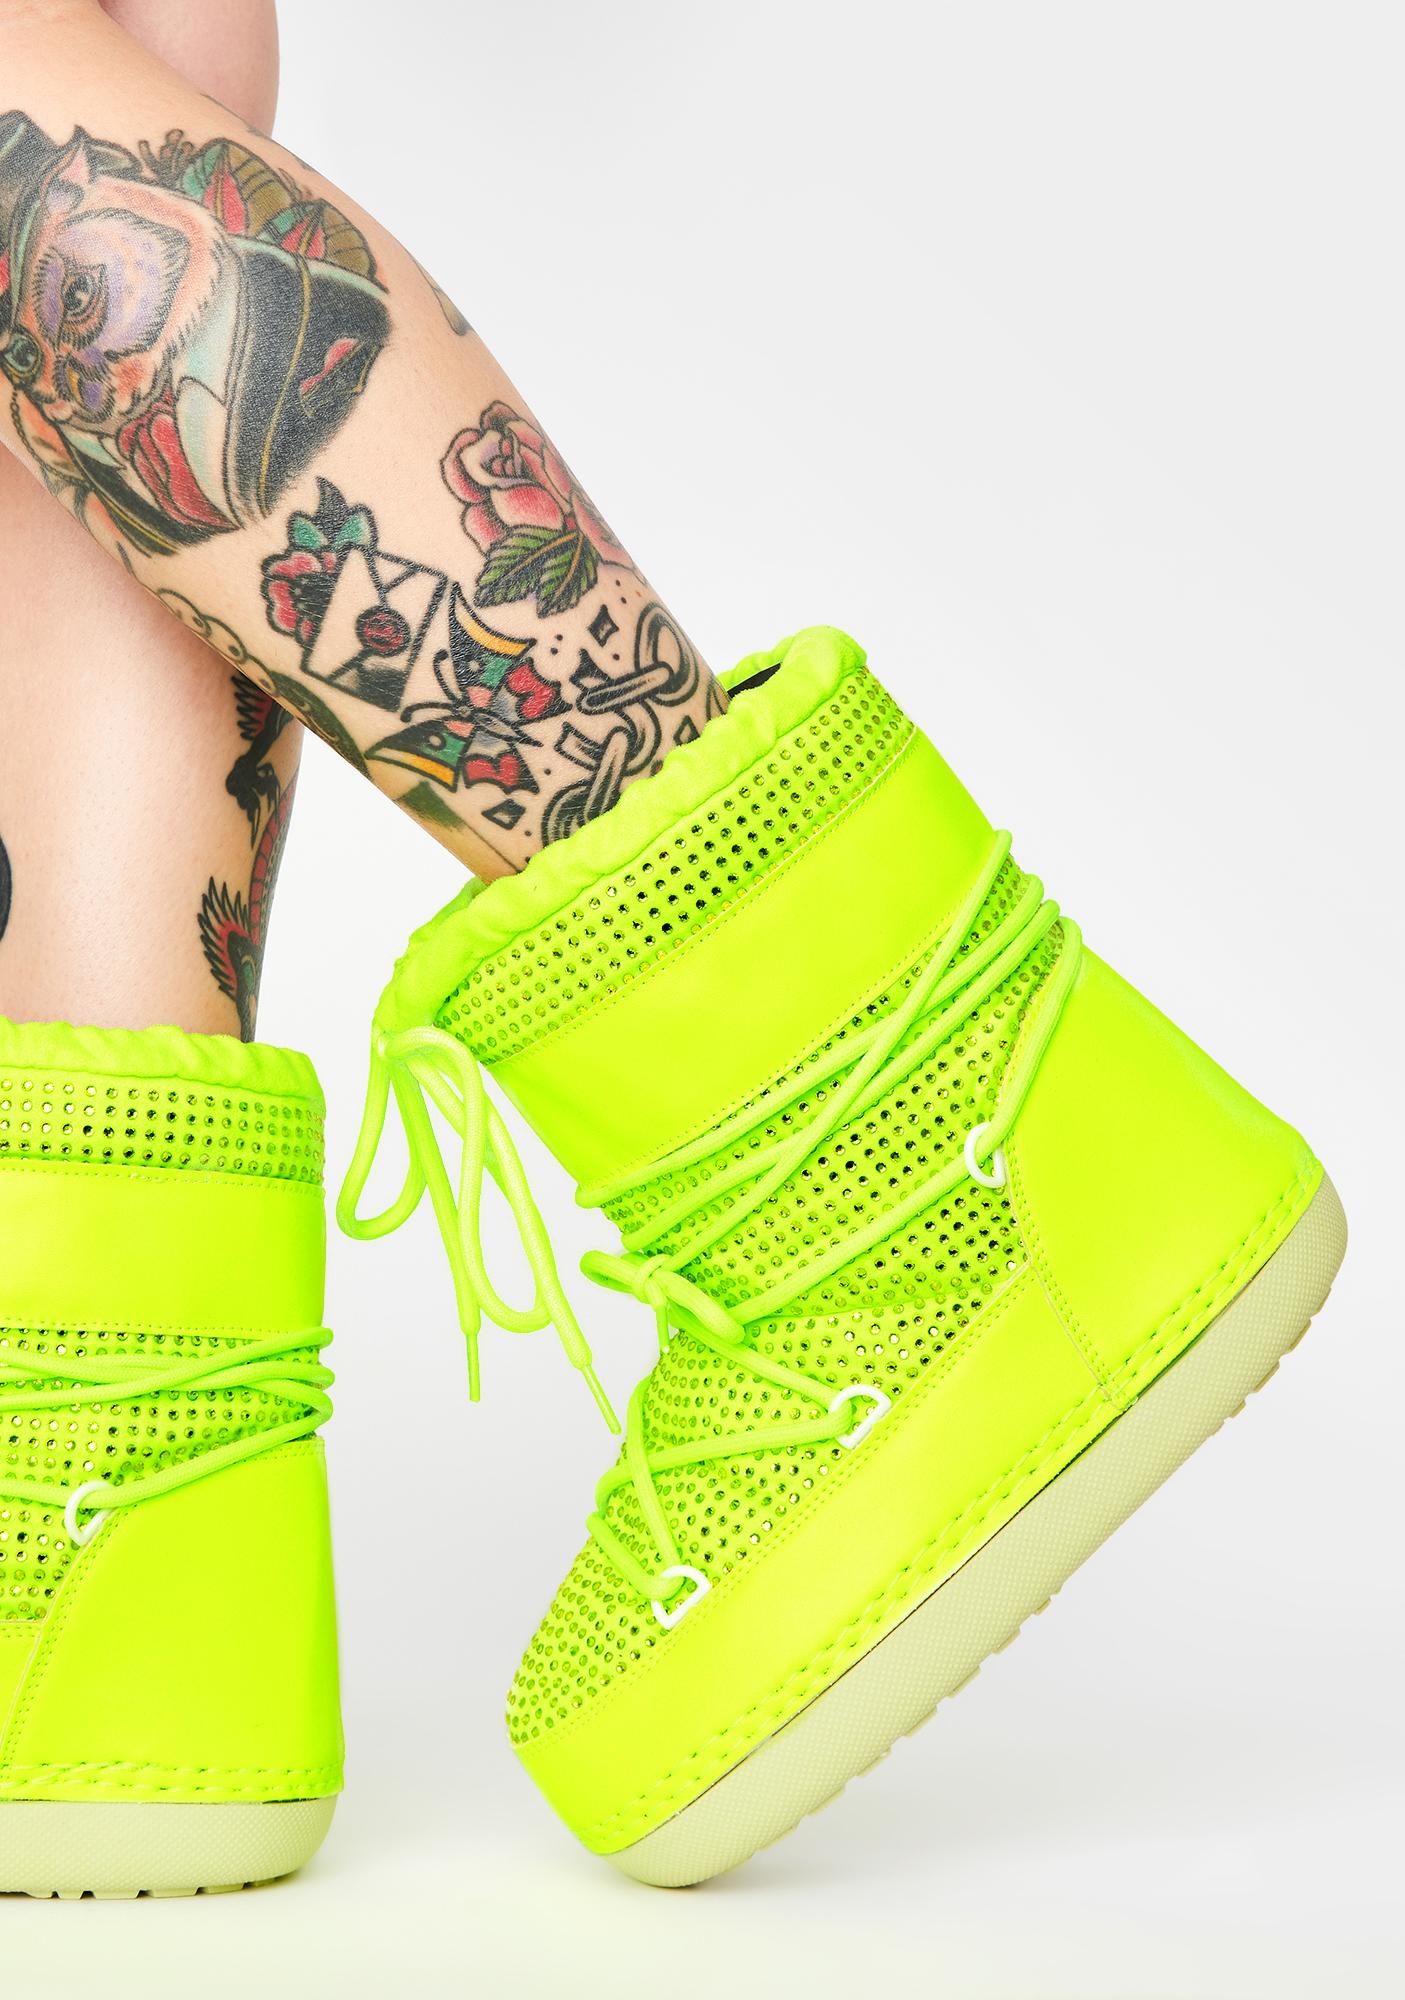 Neon Moon Boots Lace Up Winter Green 